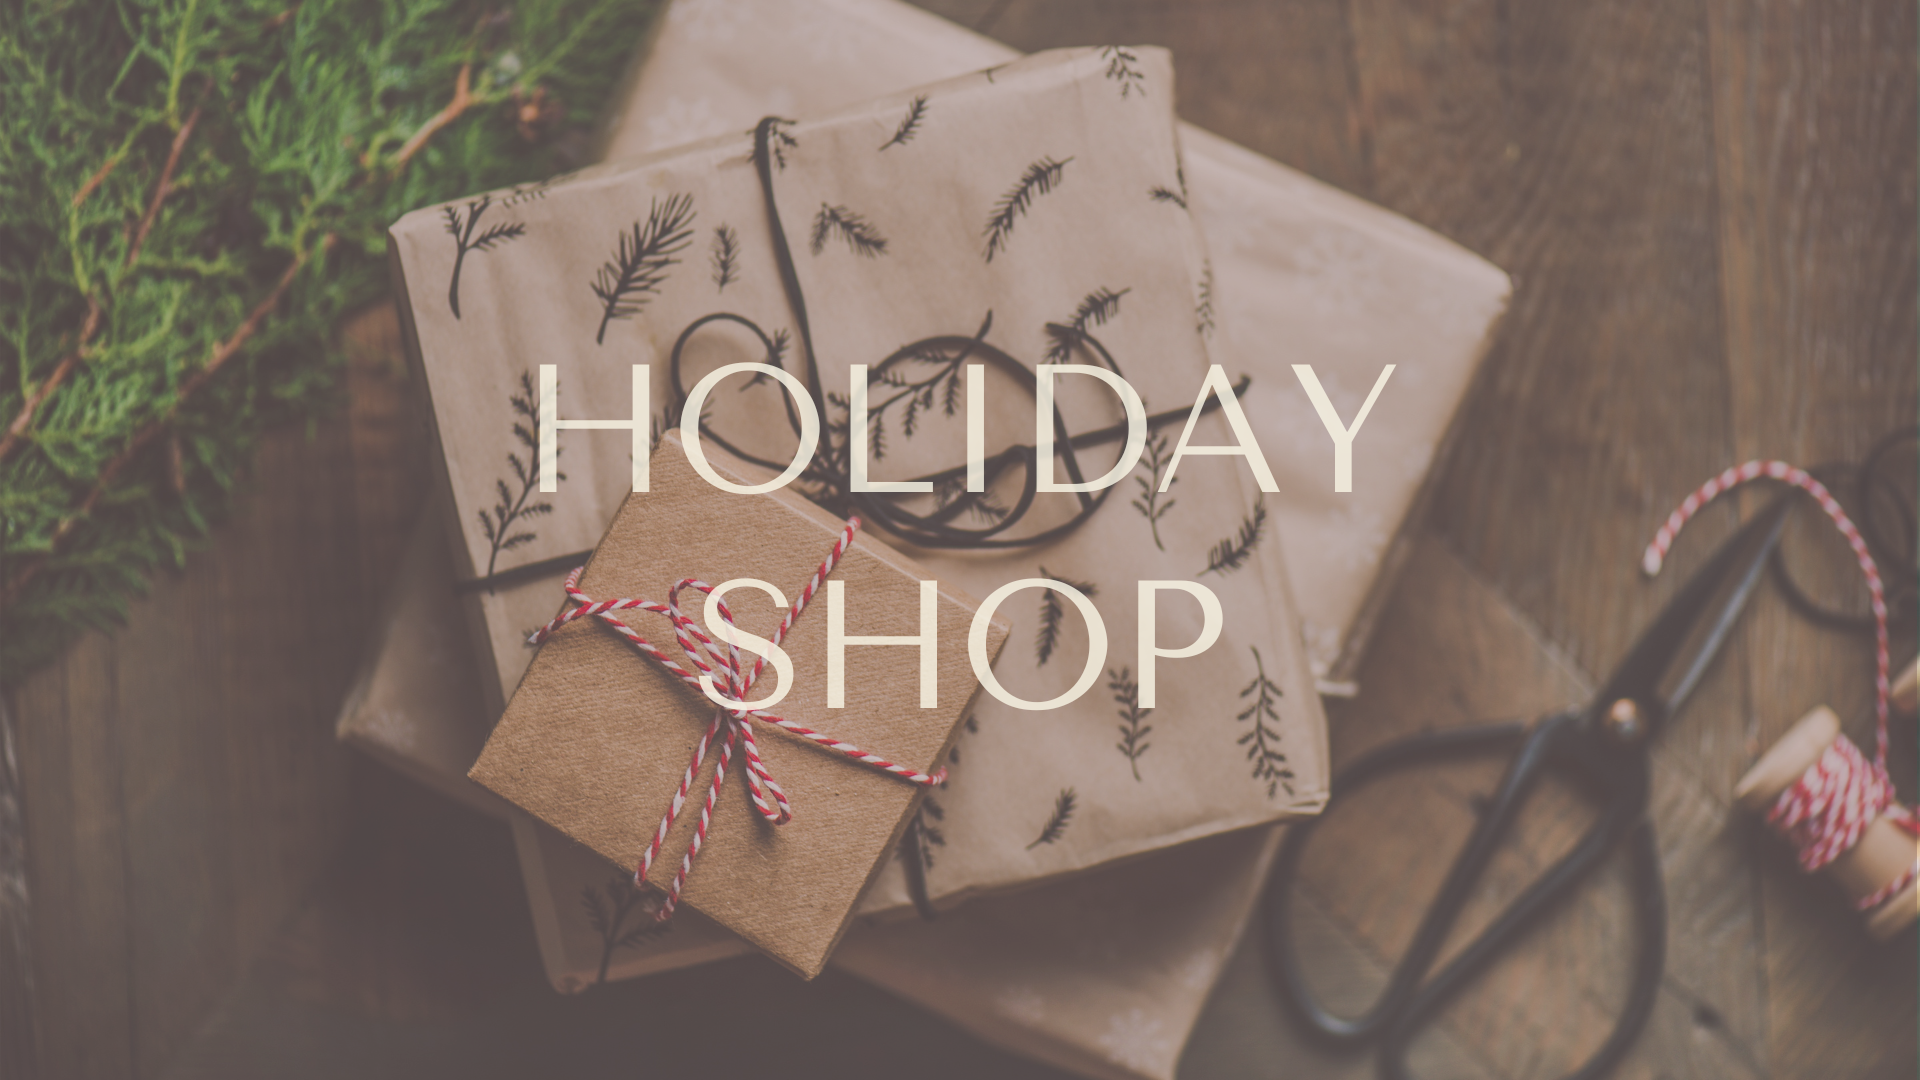 Hair Holistic Holiday Shop for haircare gifts in Toronto.